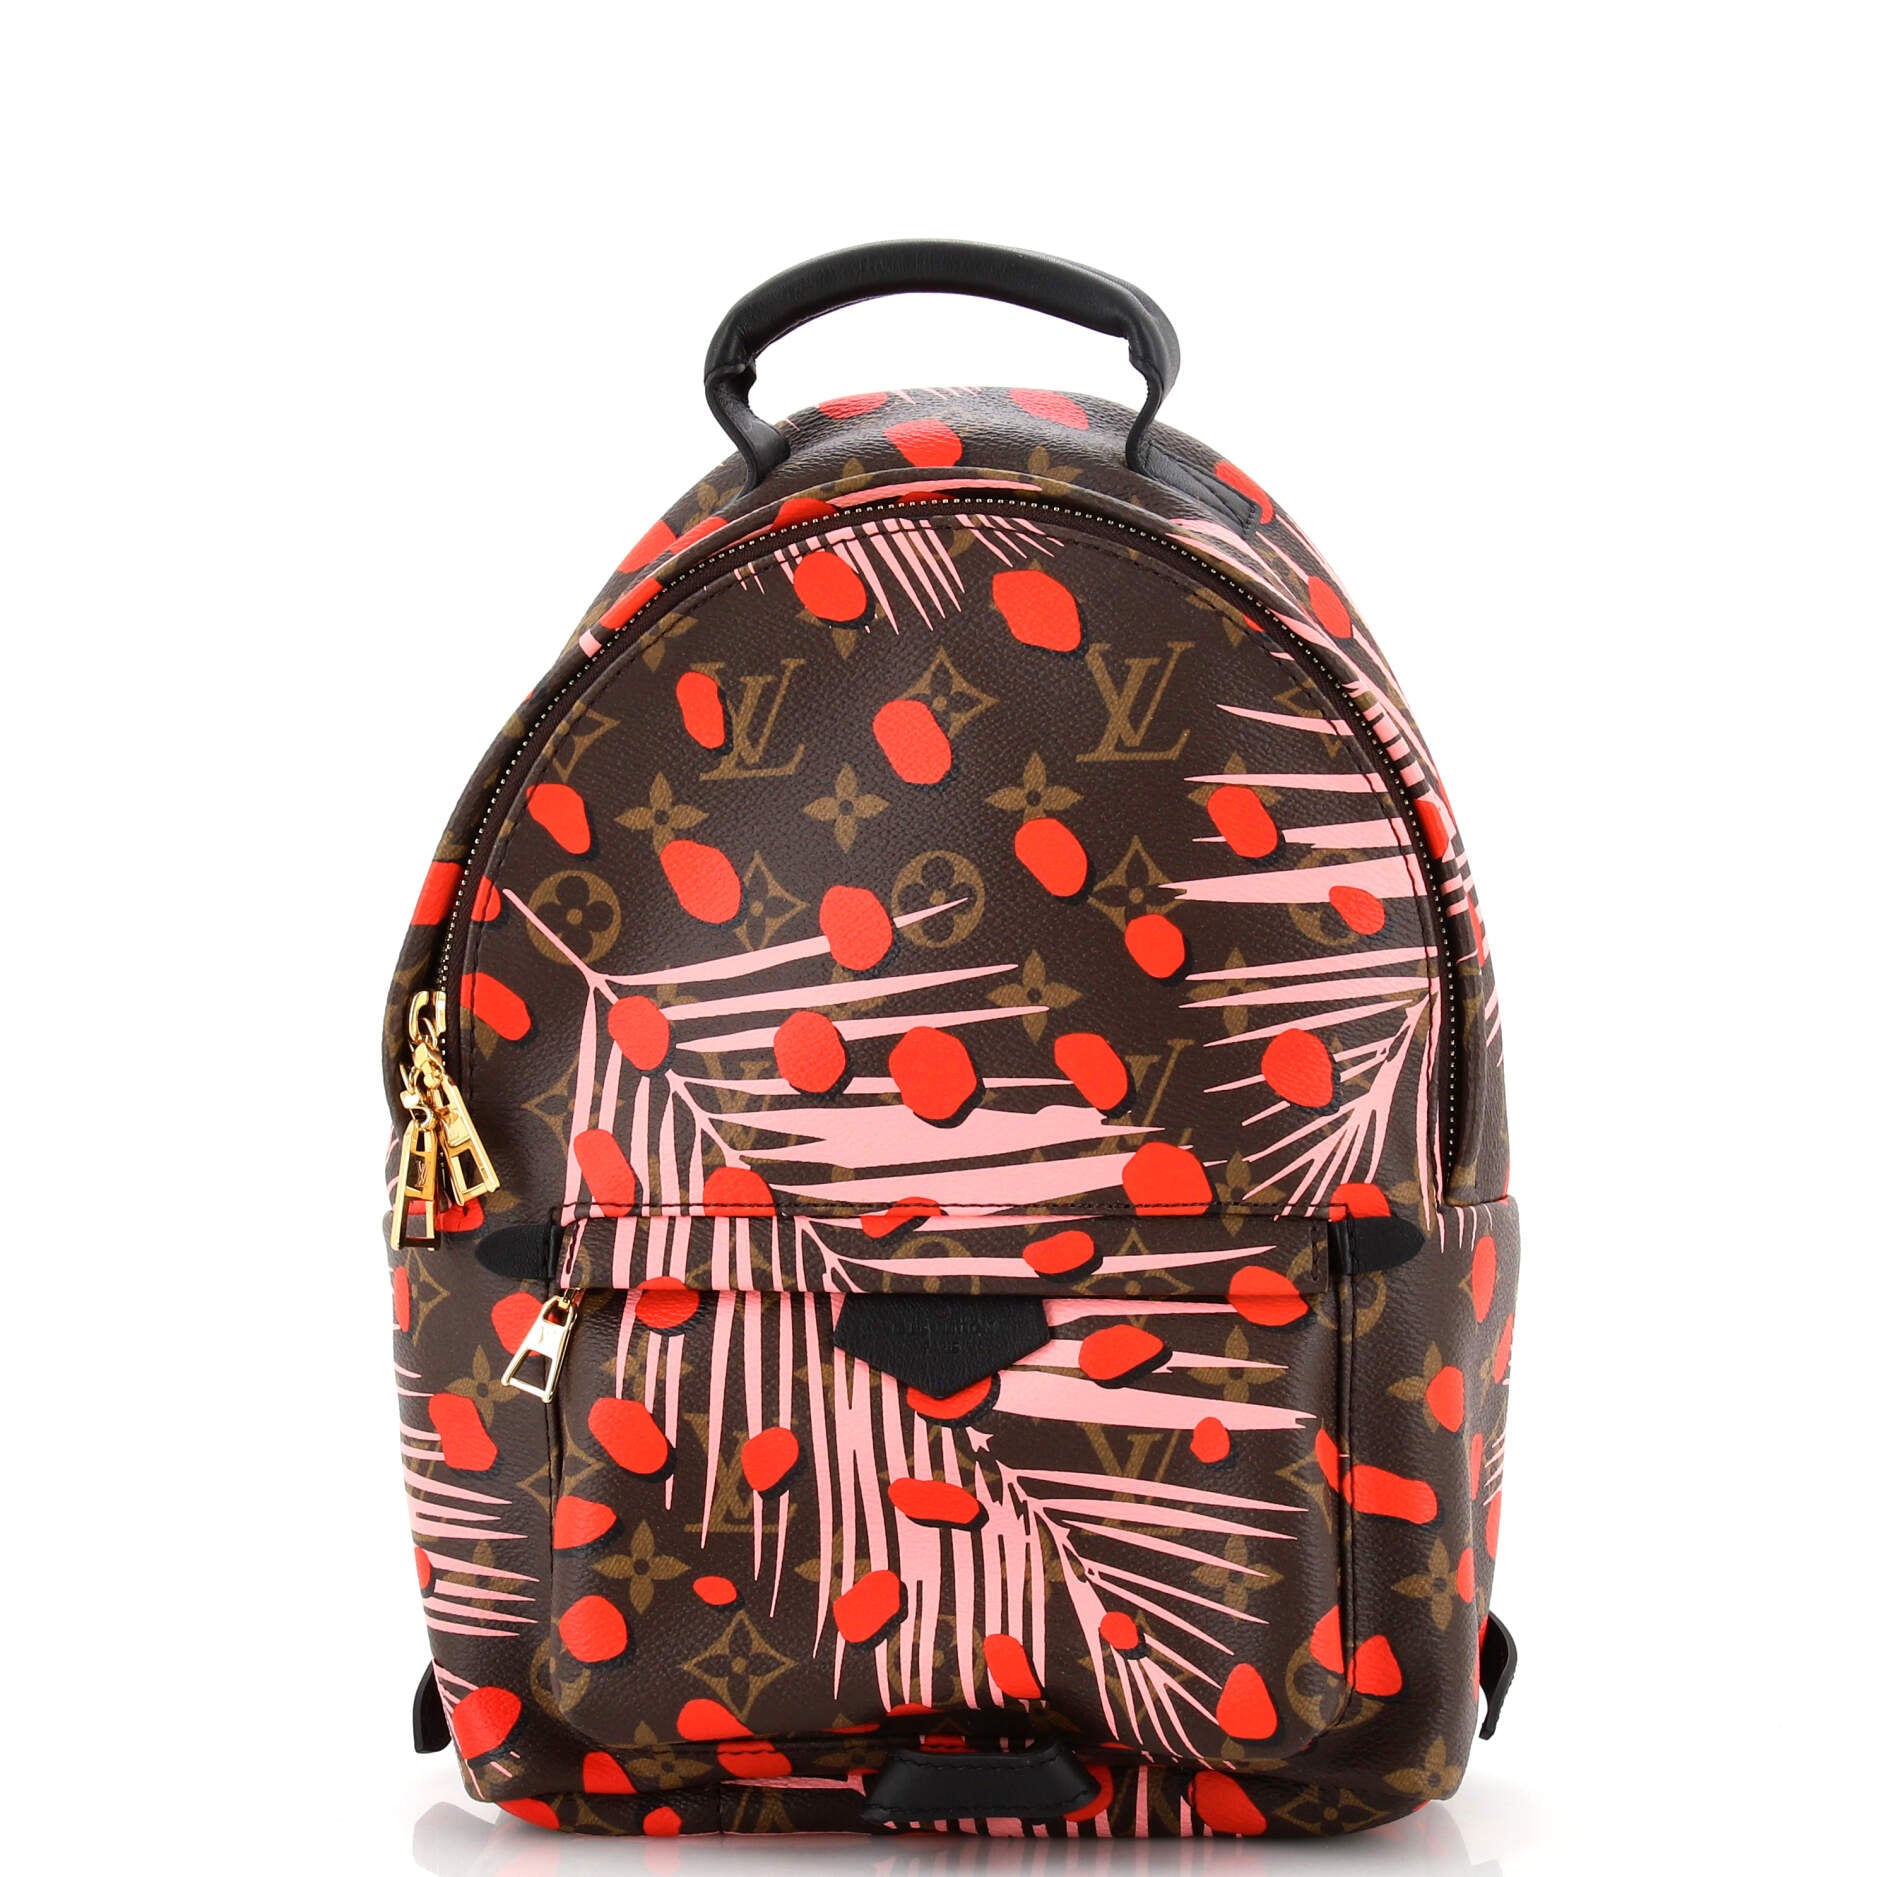 Palm Springs Backpack Limited Edition Monogram Jungle Dots PM